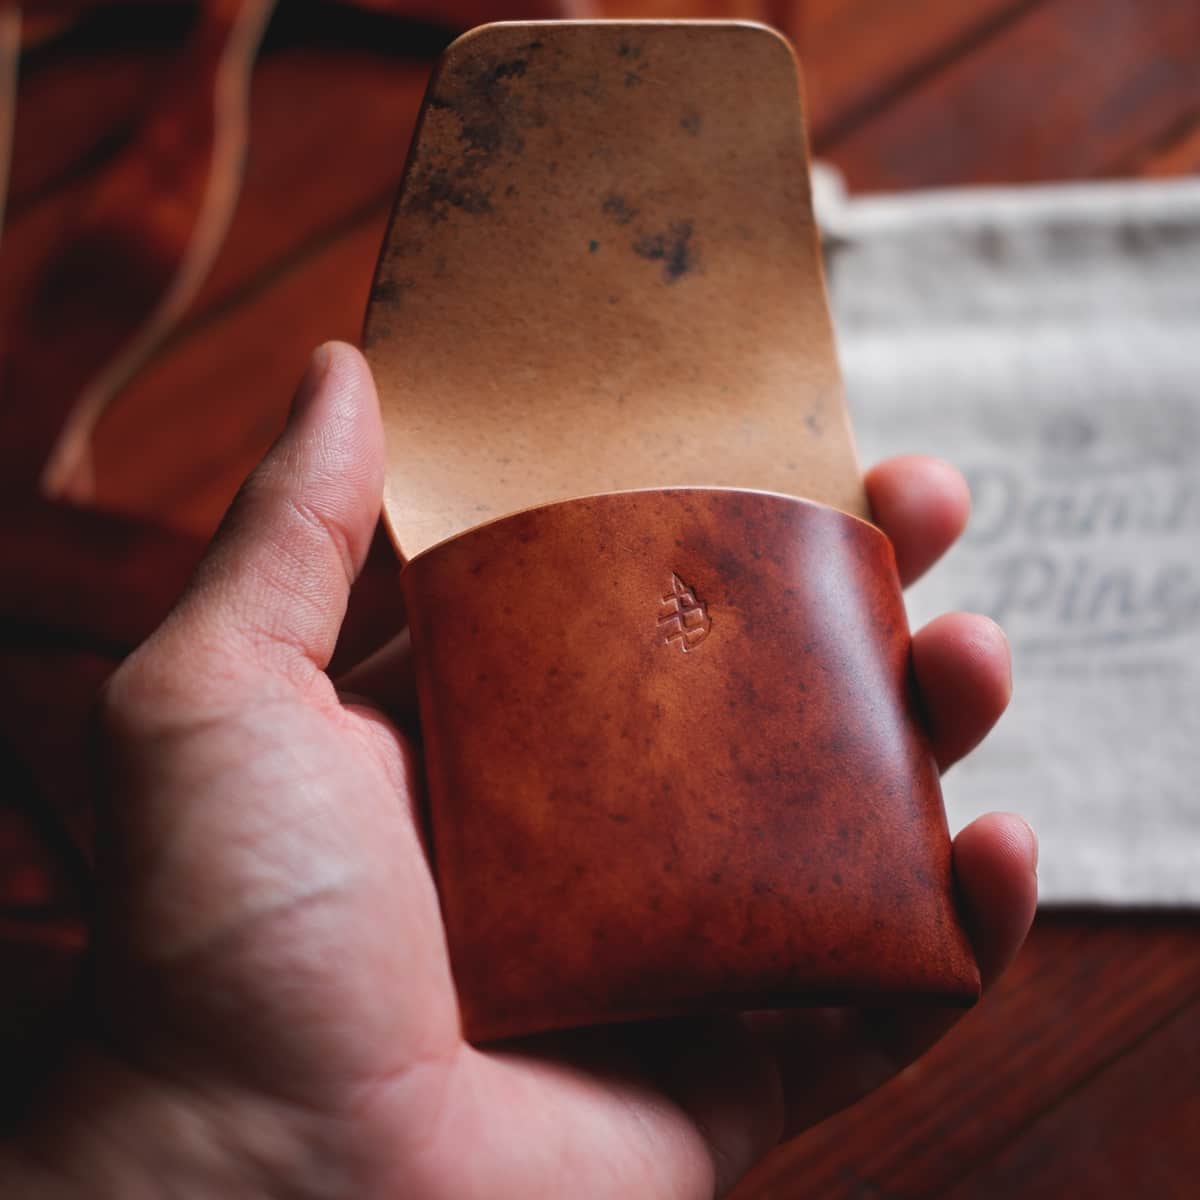 The Lodgepole Stitchless Wallet in Cognac Marbled Shell Cordovan leather held in hand with opened flap